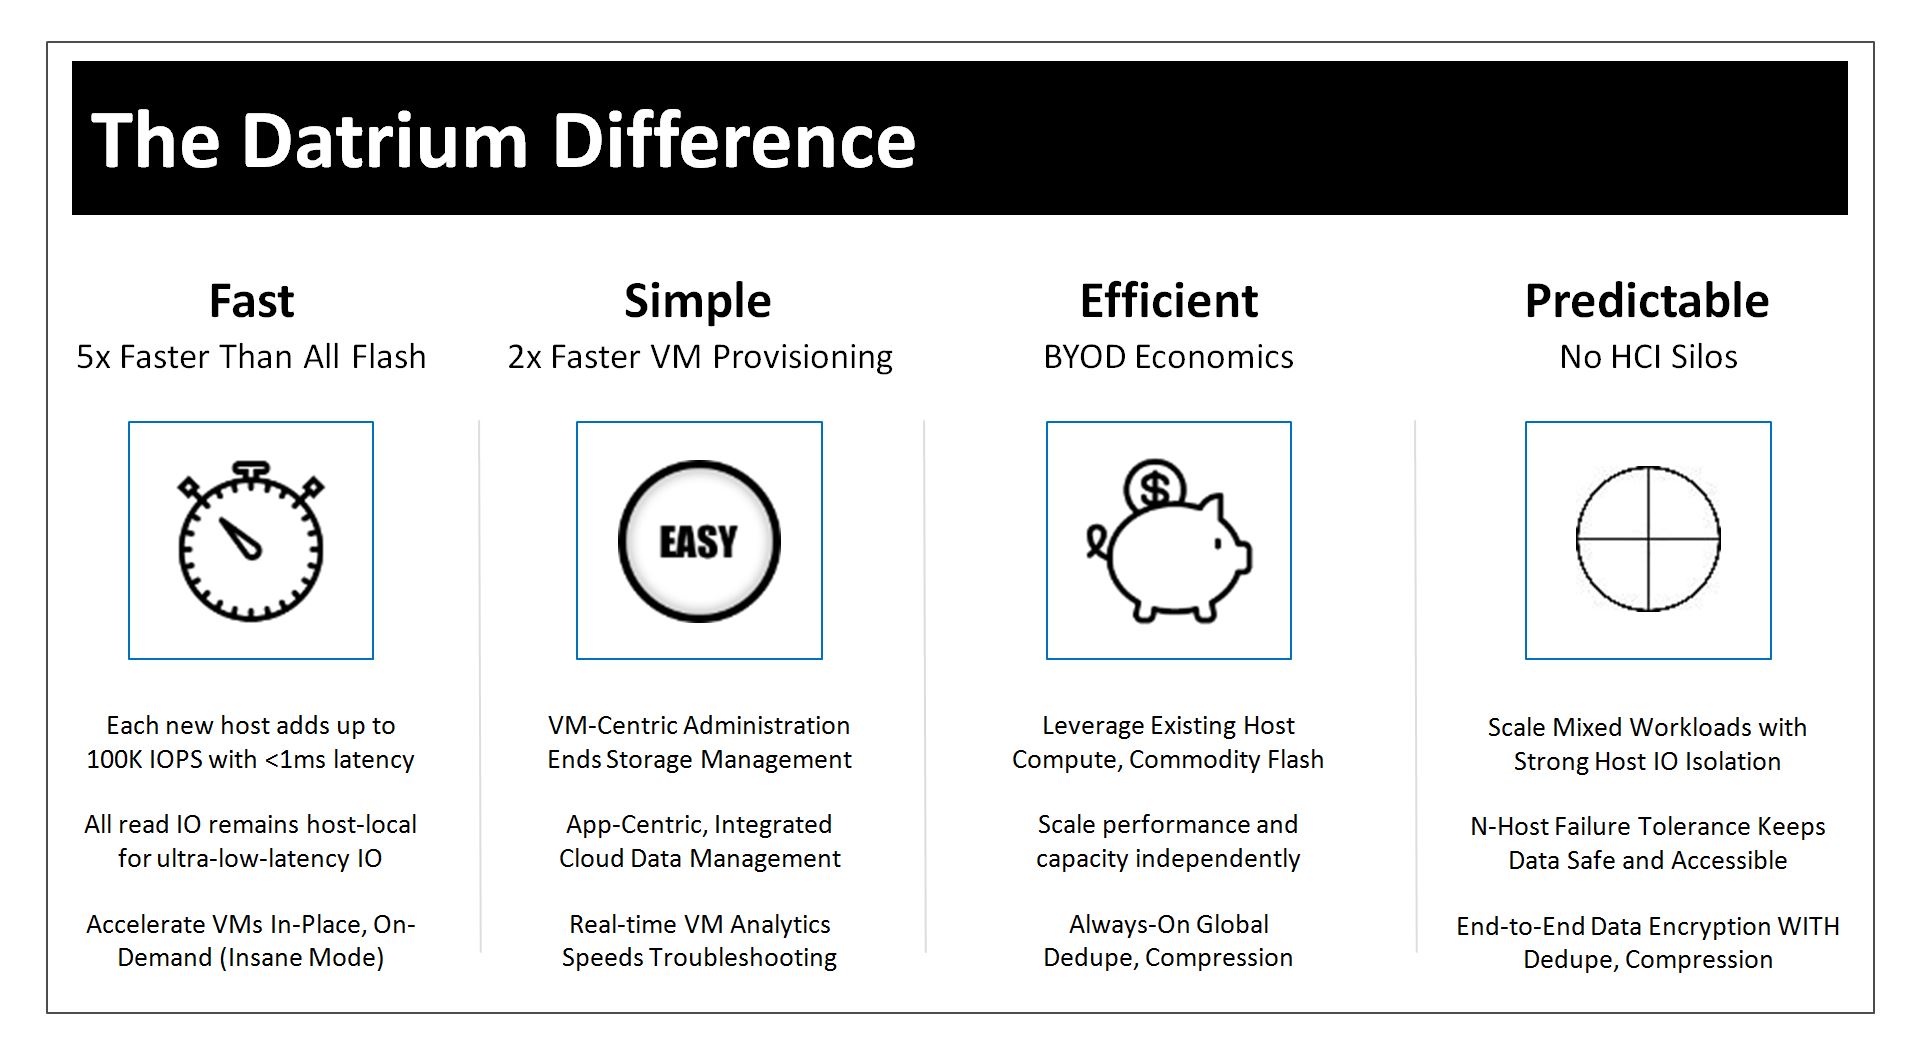 The Datrium Difference